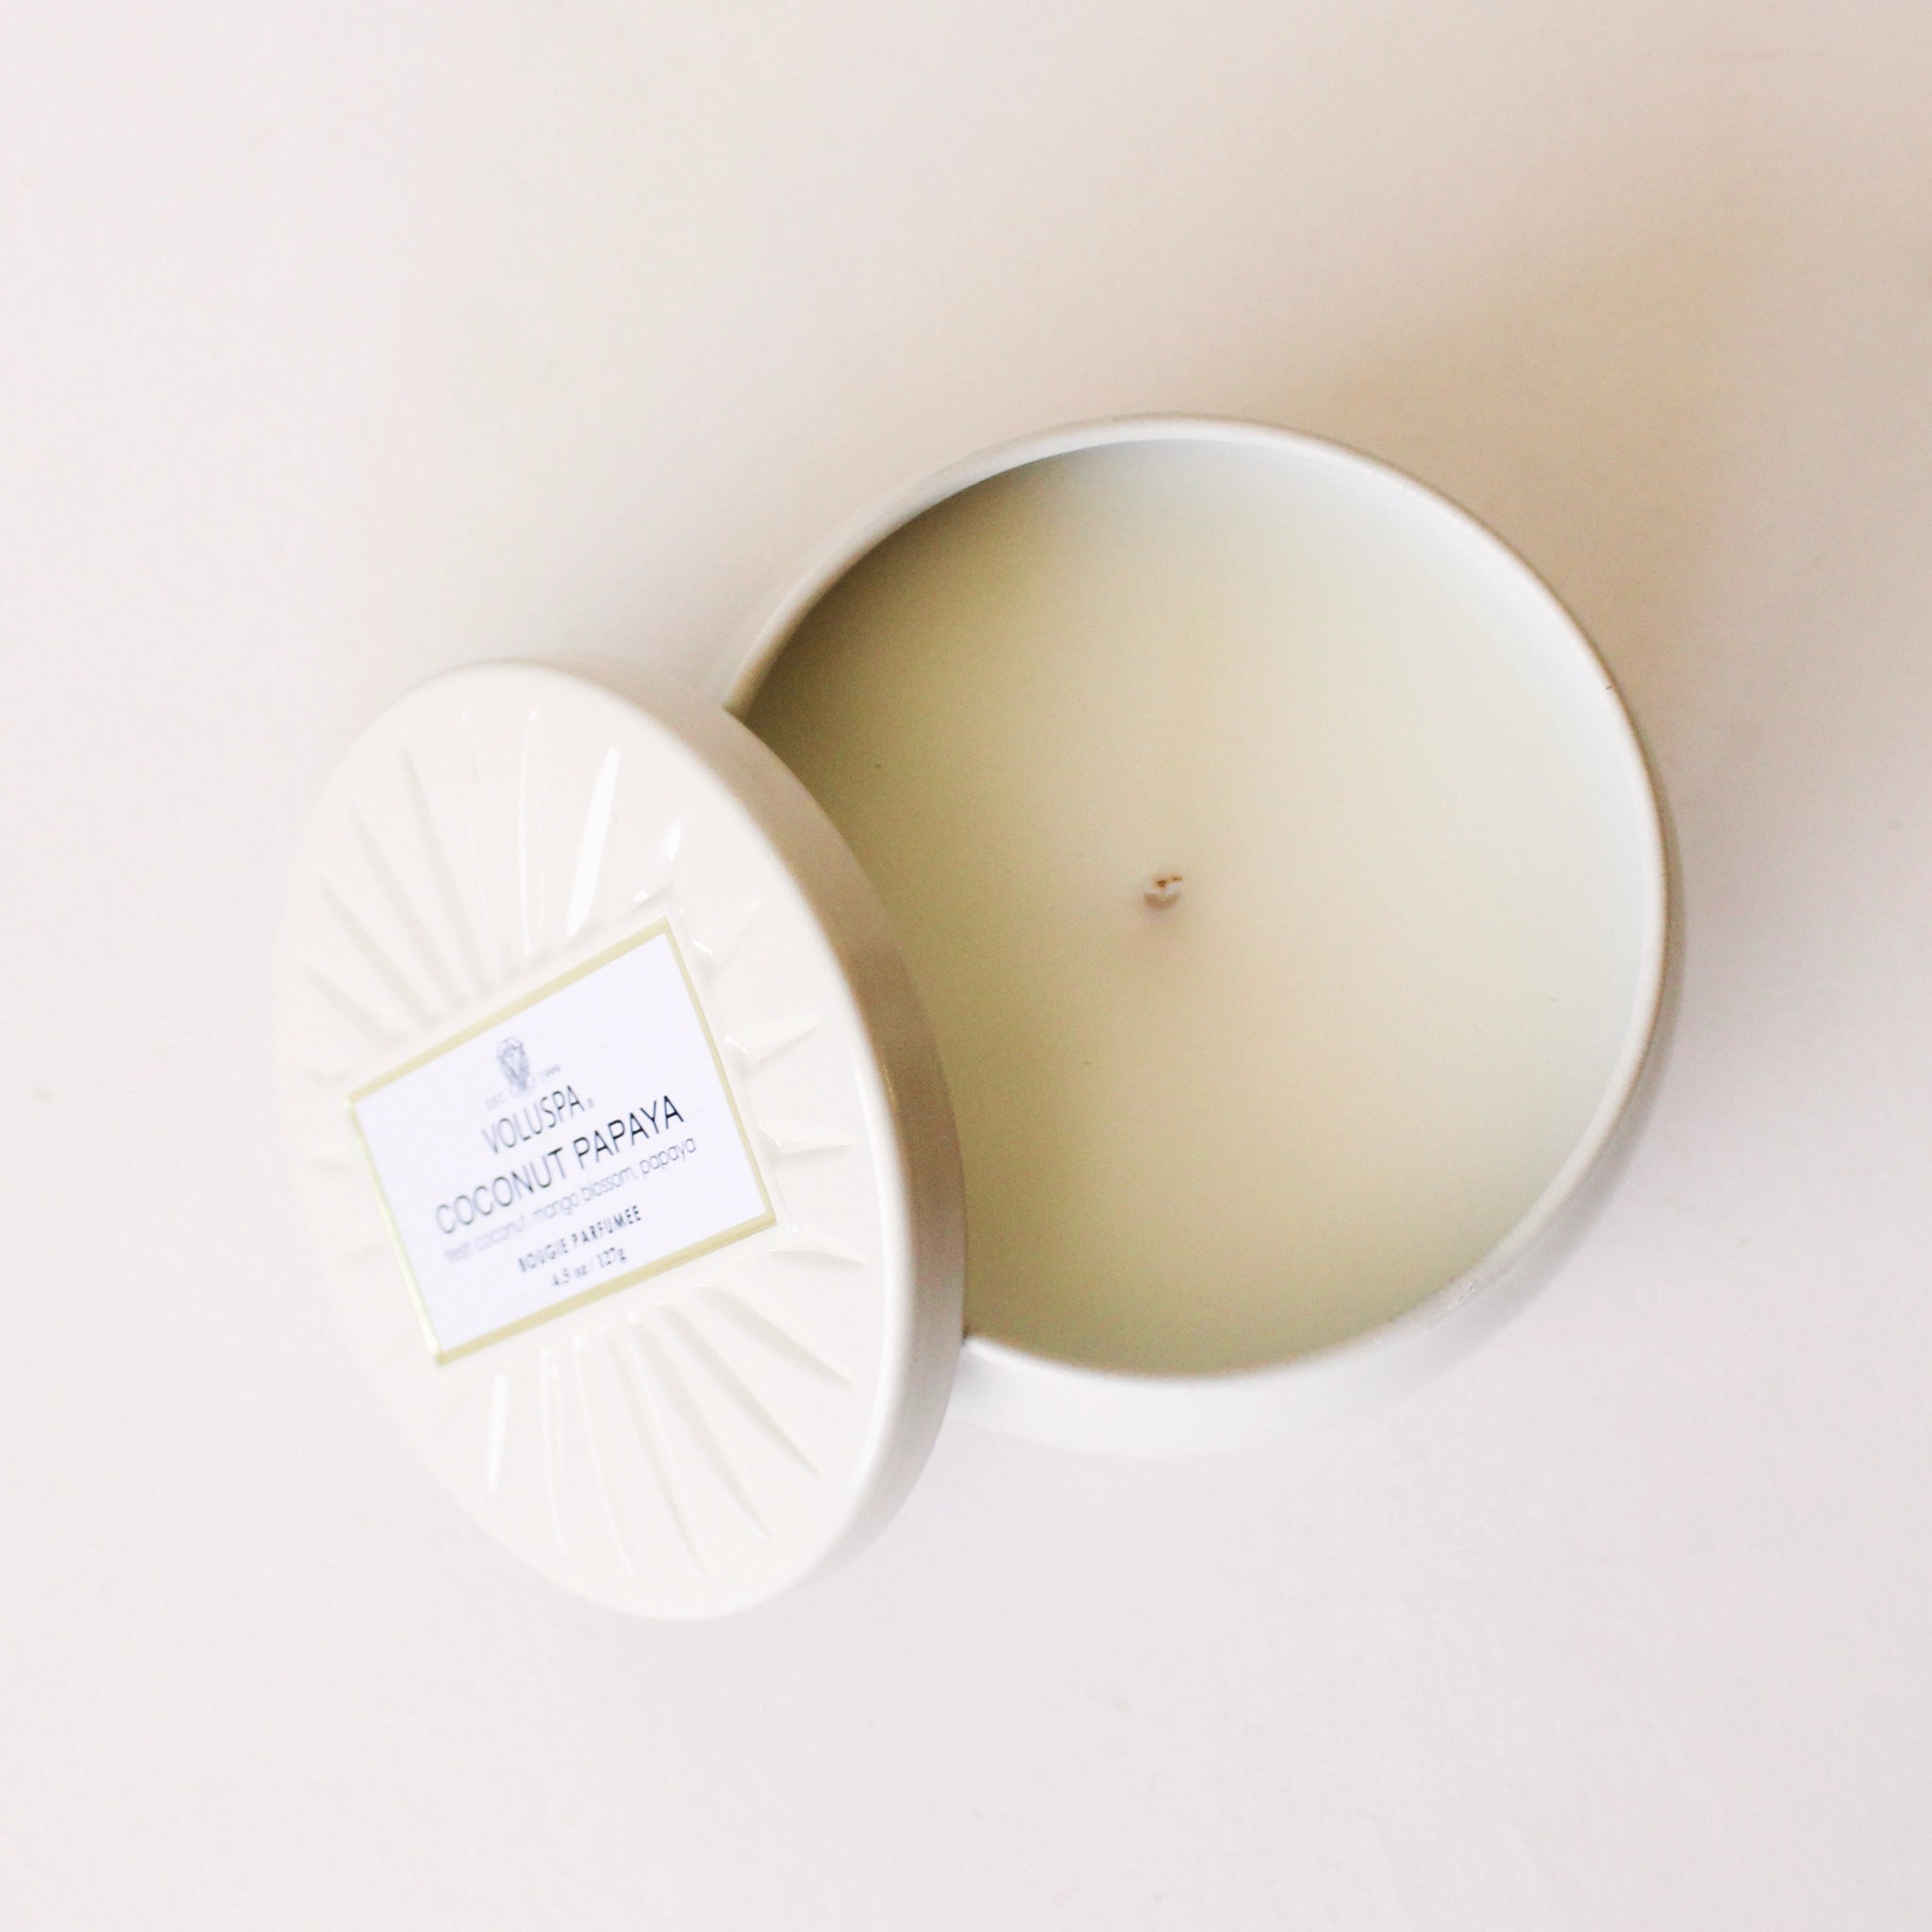 On a cream background is a round tin candle with a lid and a single wick candle inside.